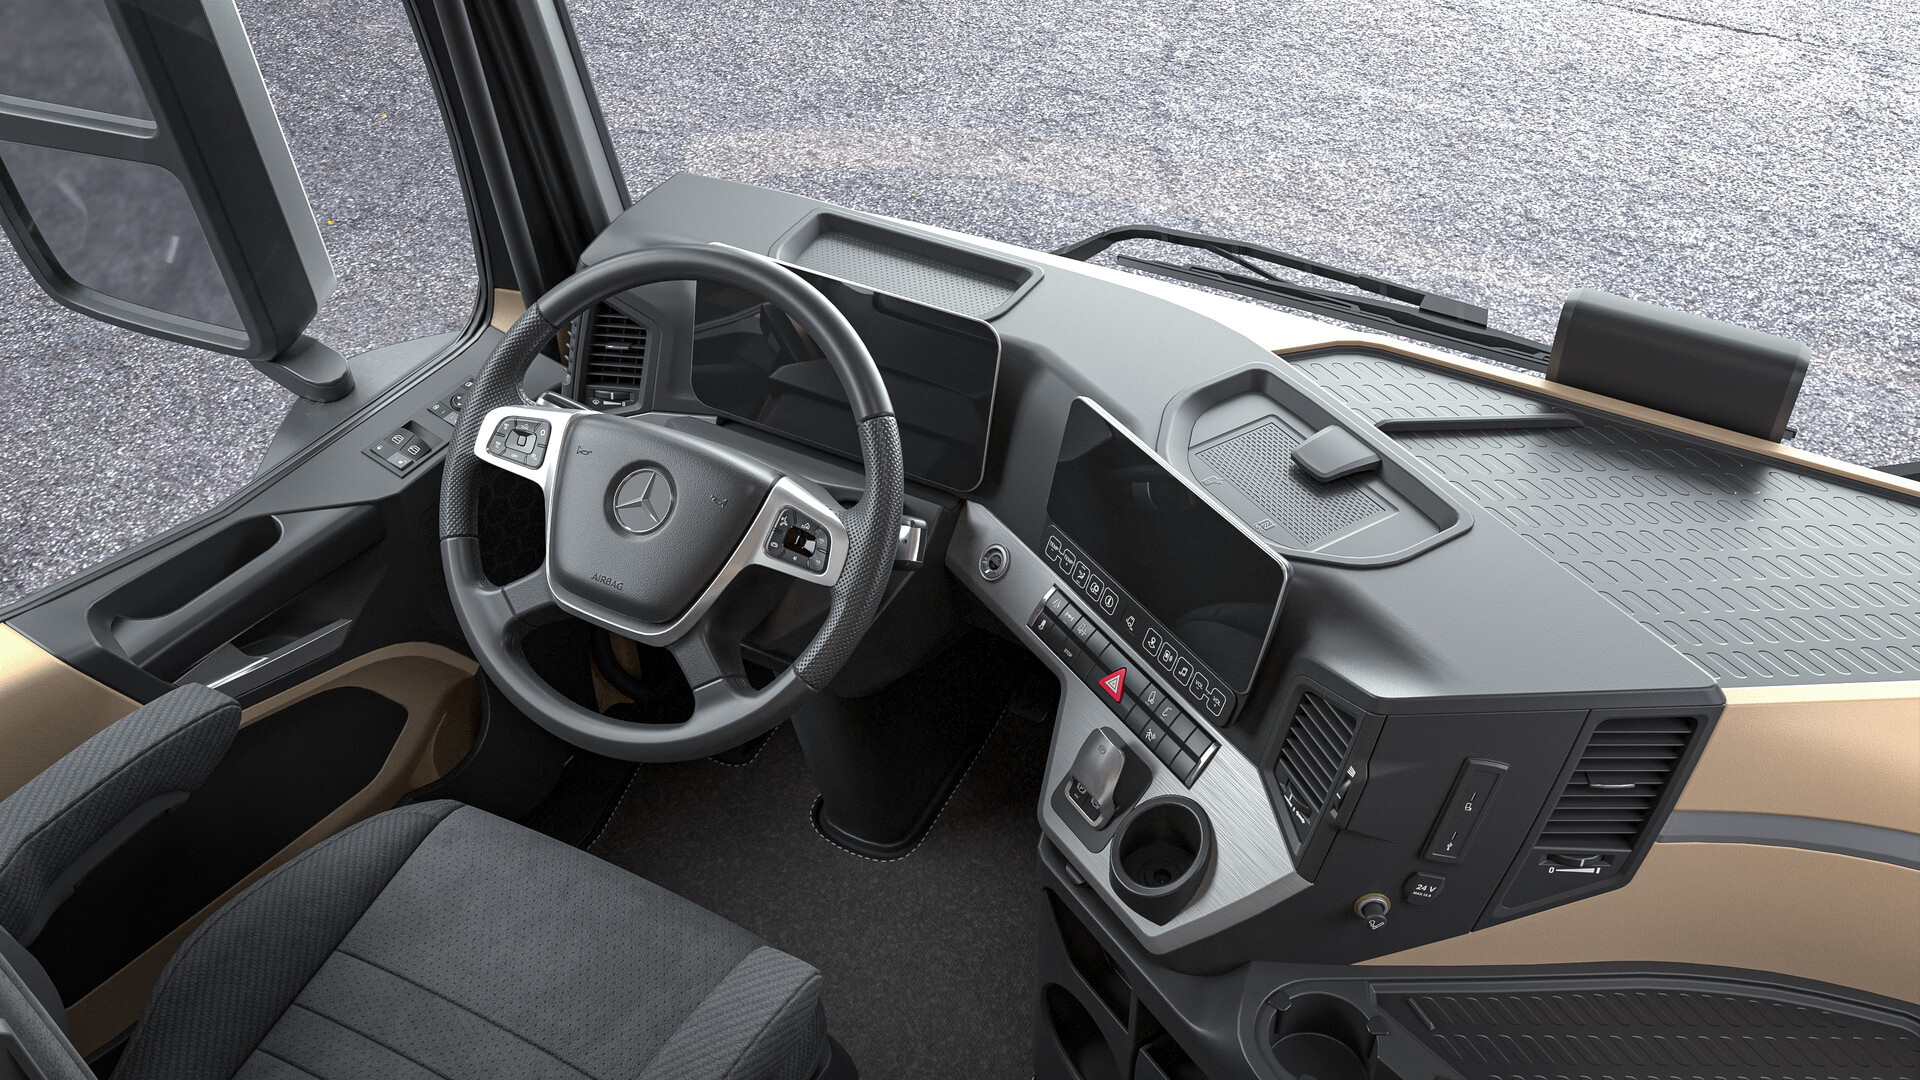 ArtStation - Mercedes Benz Actros L GigaSpace MP5 with Interior